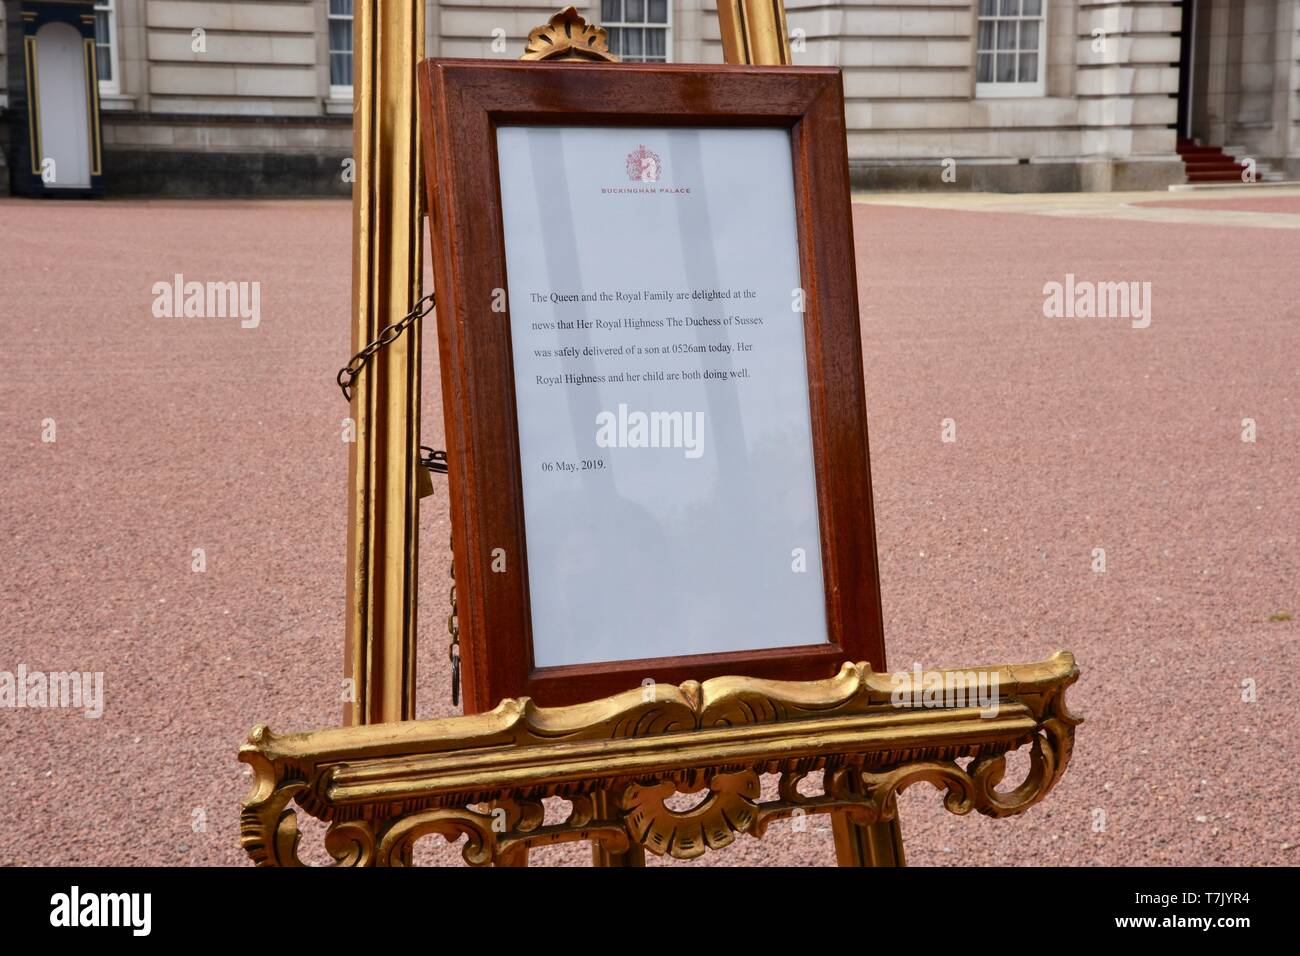 Meghan Duchess of Sussex gave birth to a baby on 06/05/2019. A notice was placed on an easel in the forecourt of Buckingham Palace to announce the Royal Birth to the Duke and Duchess of Sussex. Buckingham Palace, London. UK Stock Photo